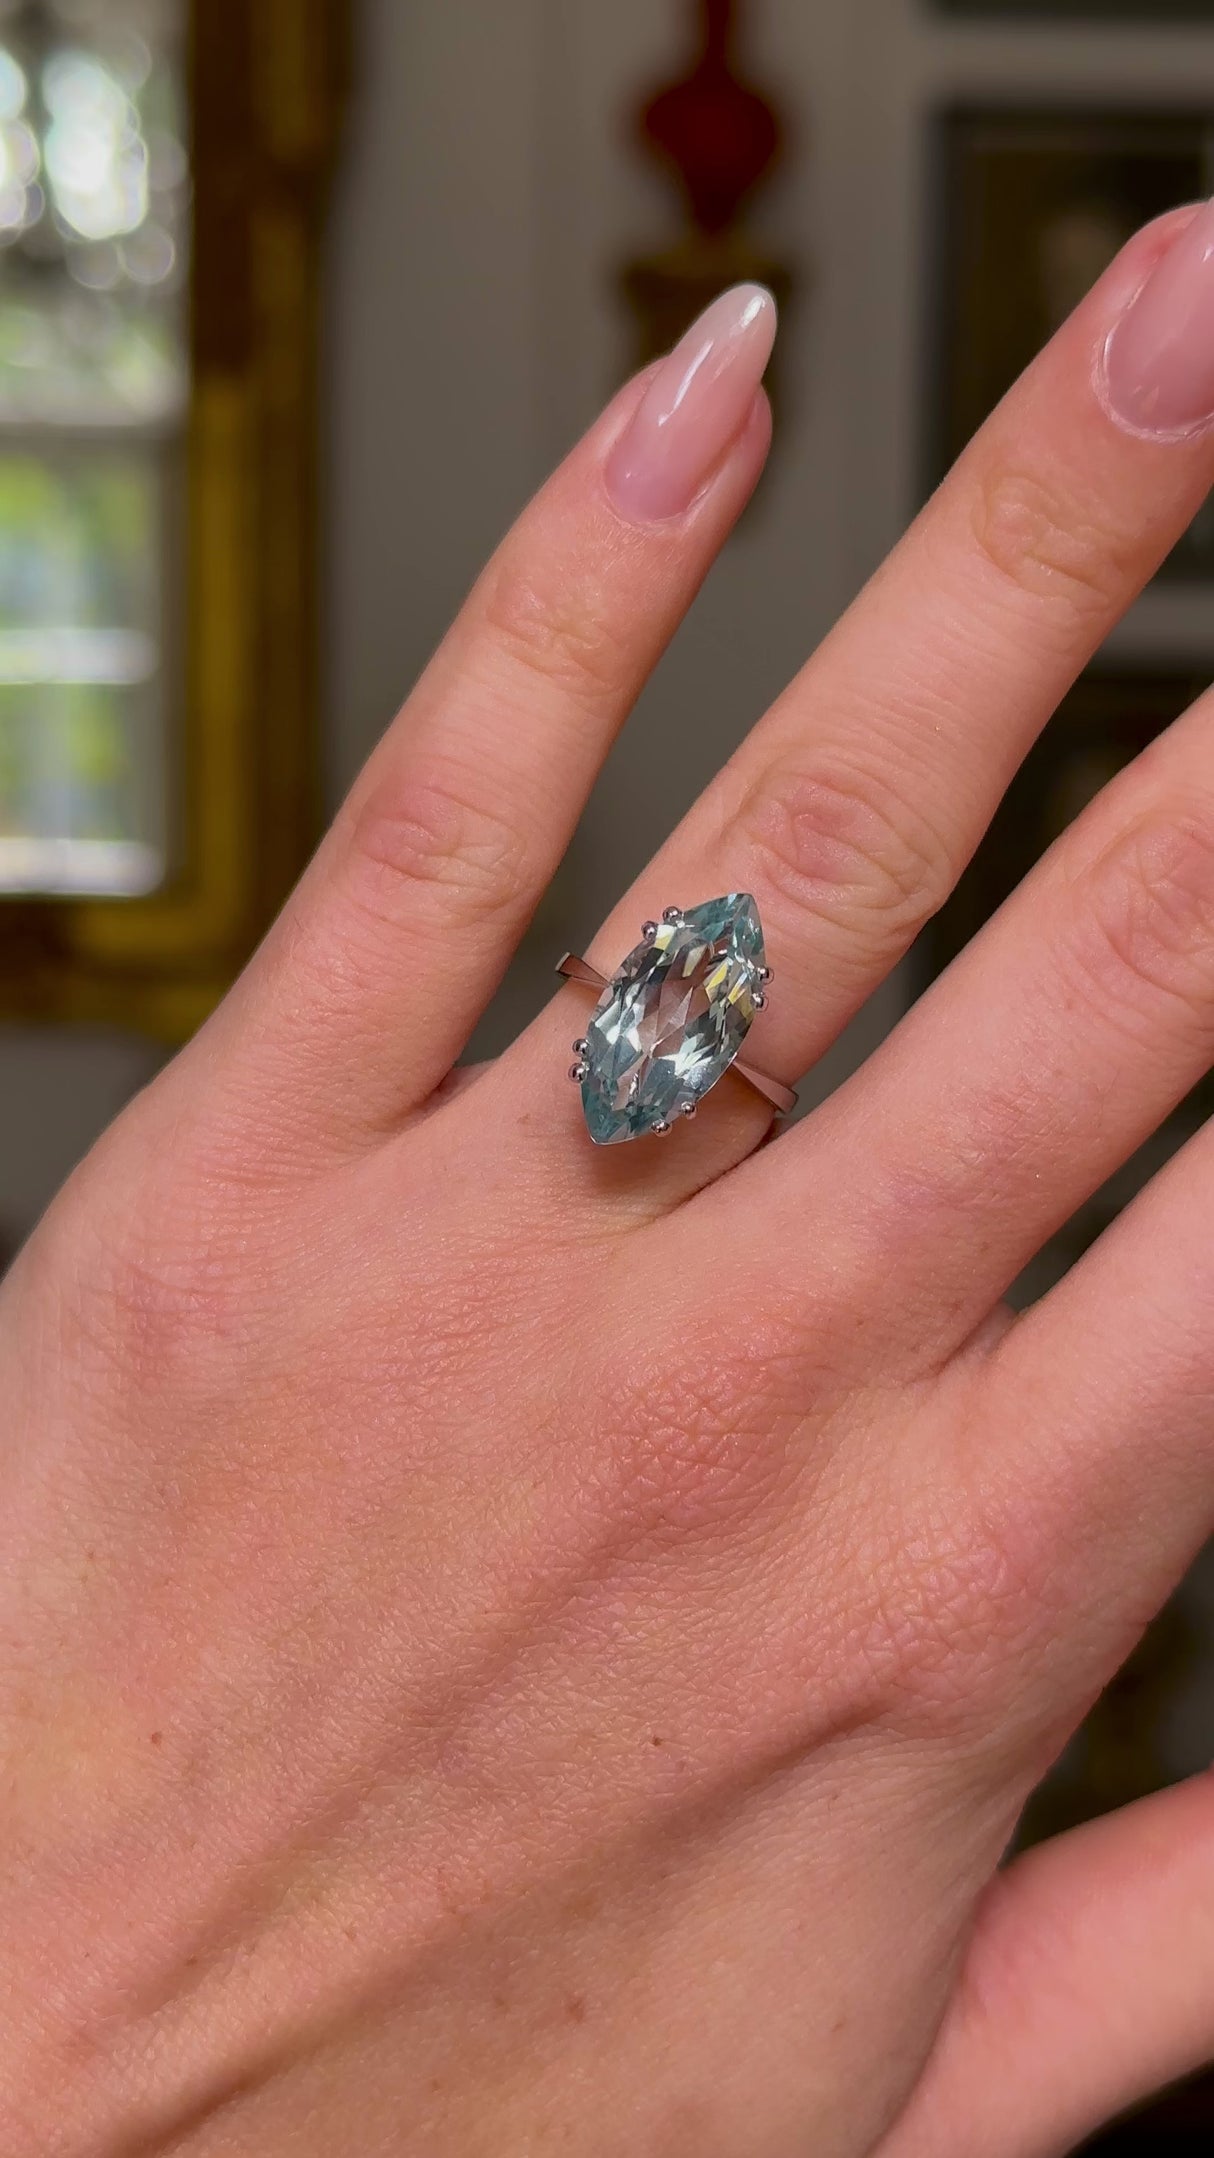 vintage marquise cut aquamarine ring, worn on hand and moved away from lens to perspective, front view. 